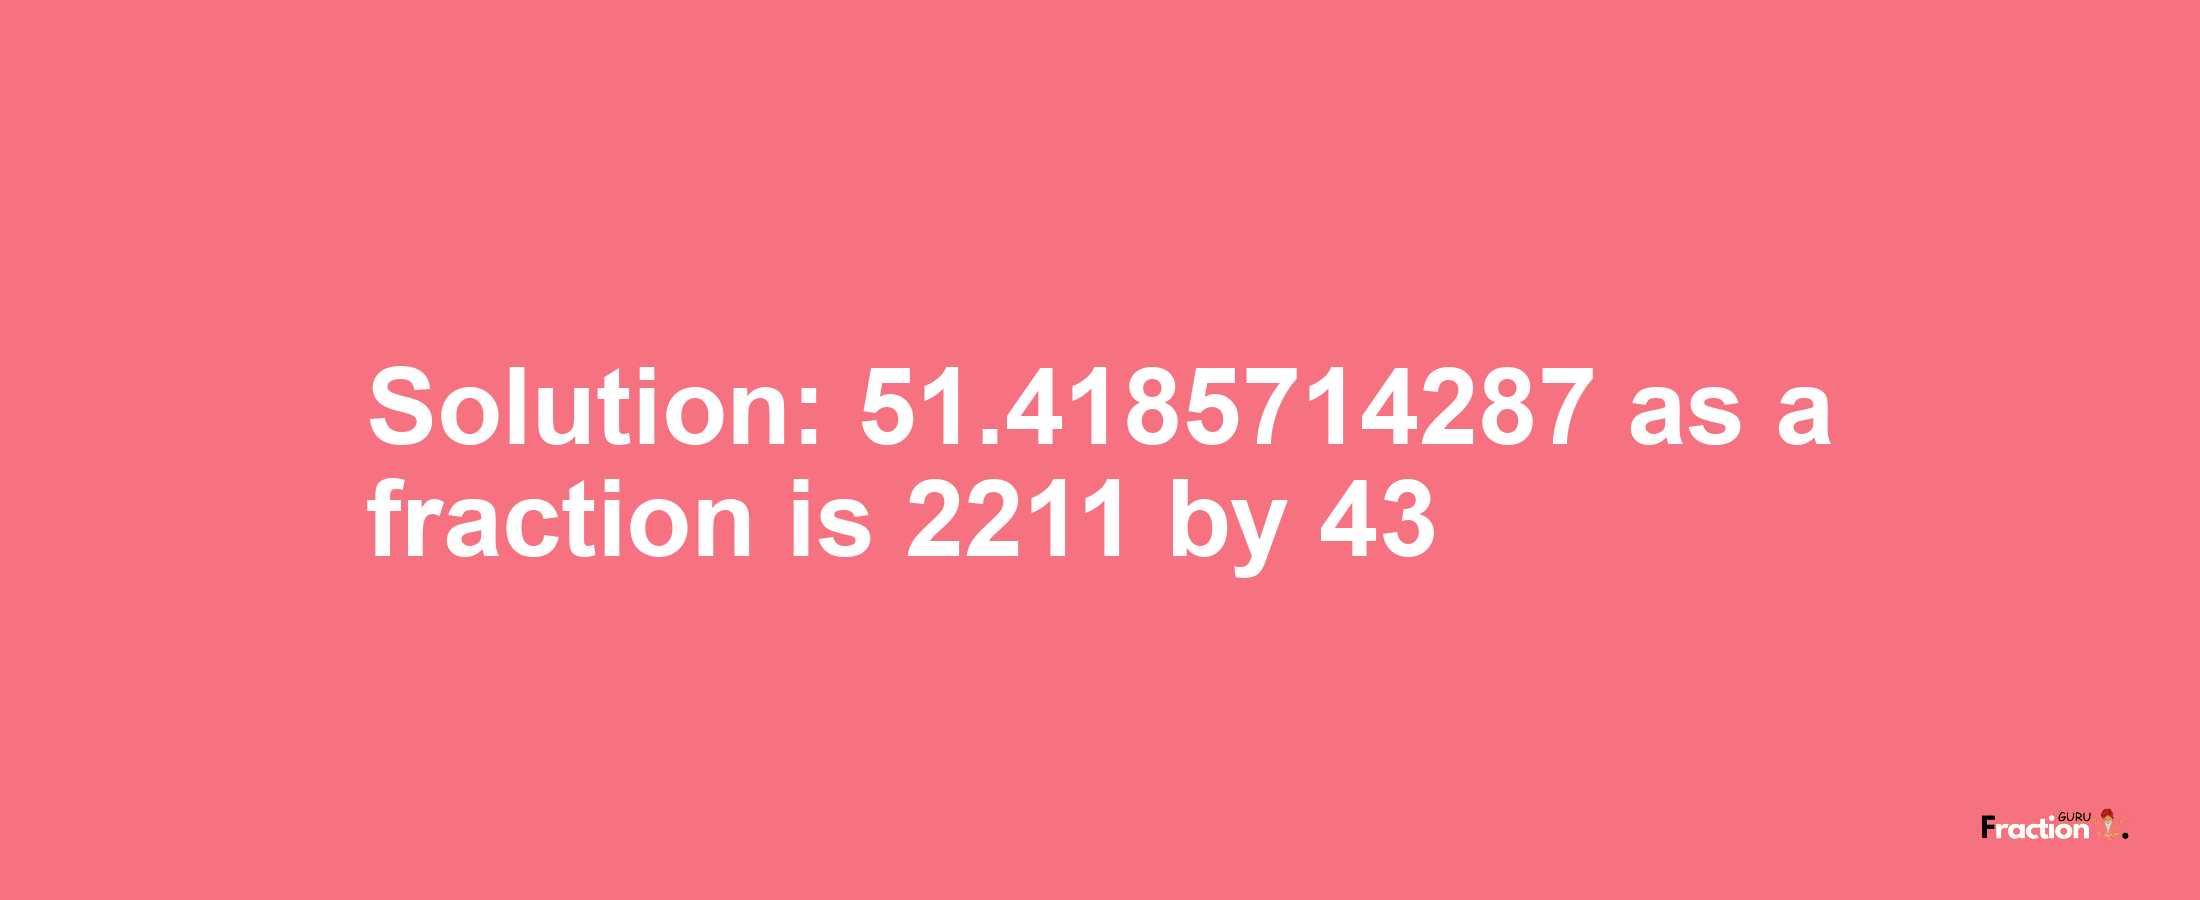 Solution:51.4185714287 as a fraction is 2211/43